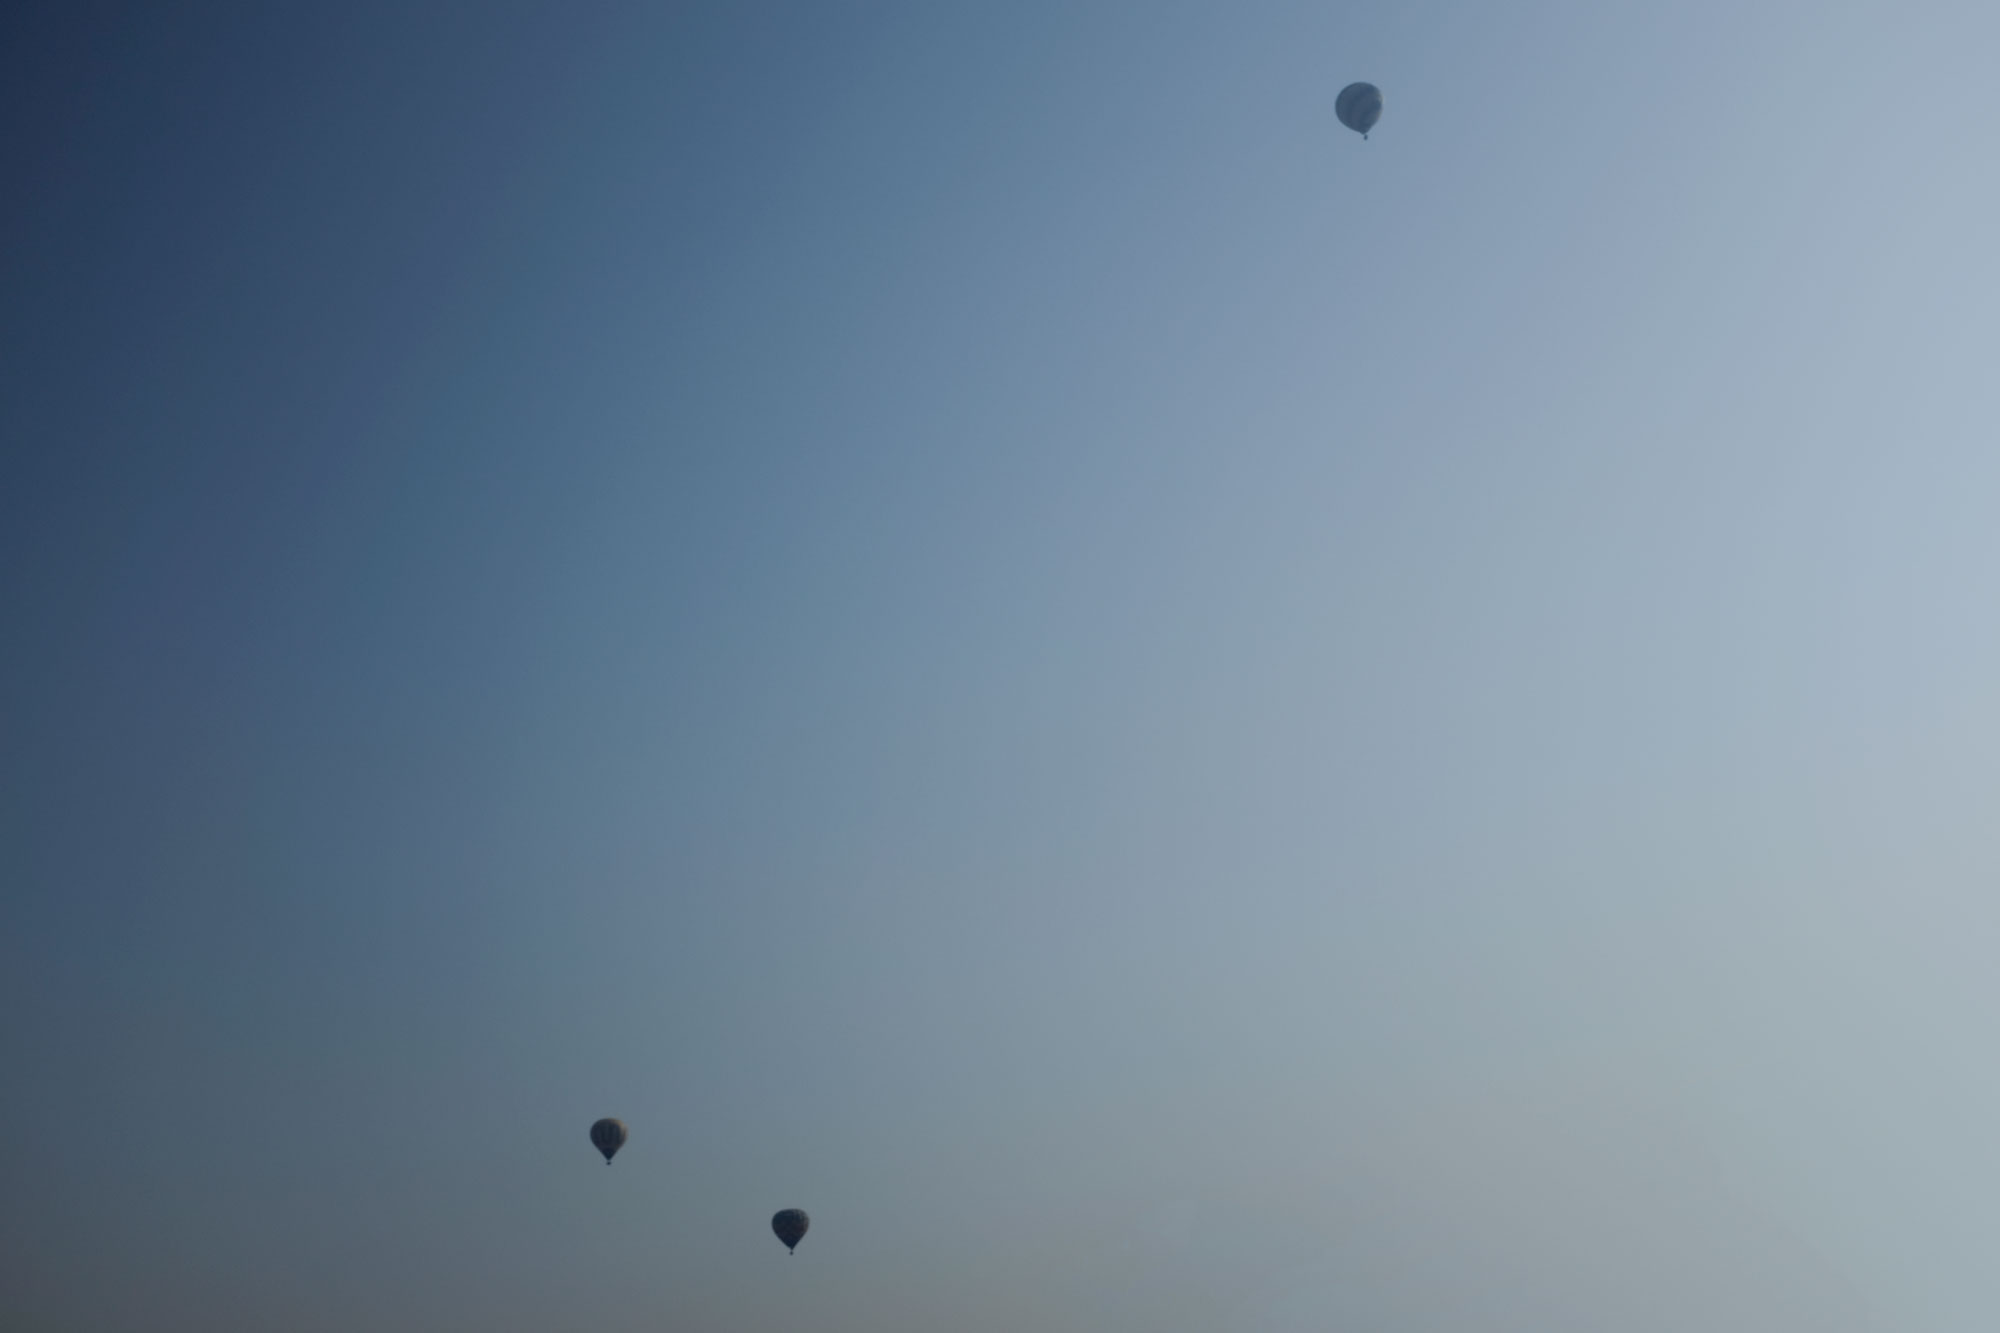 Three hot air balloons in the sky